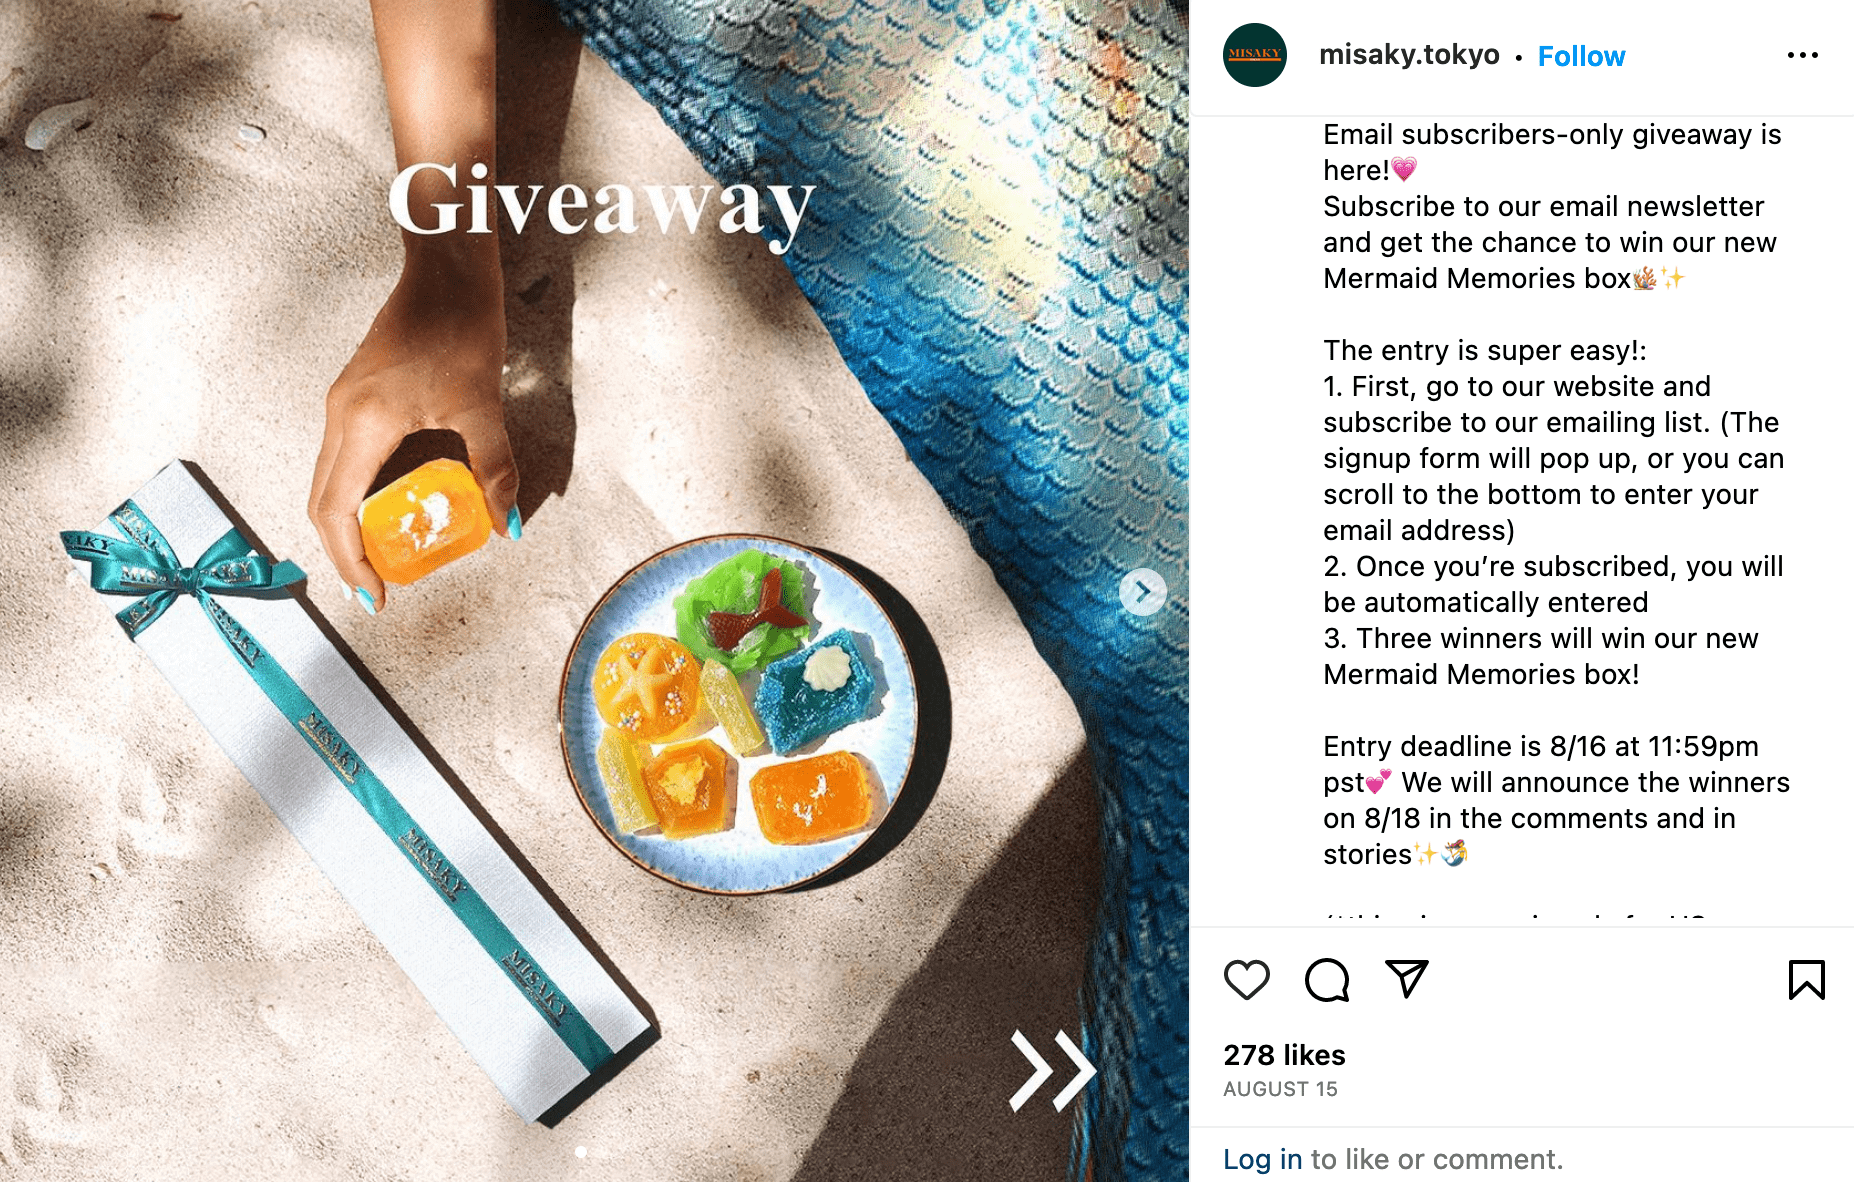 An Instagram giveaway exclusively for the brand’s email newsletter subscribers